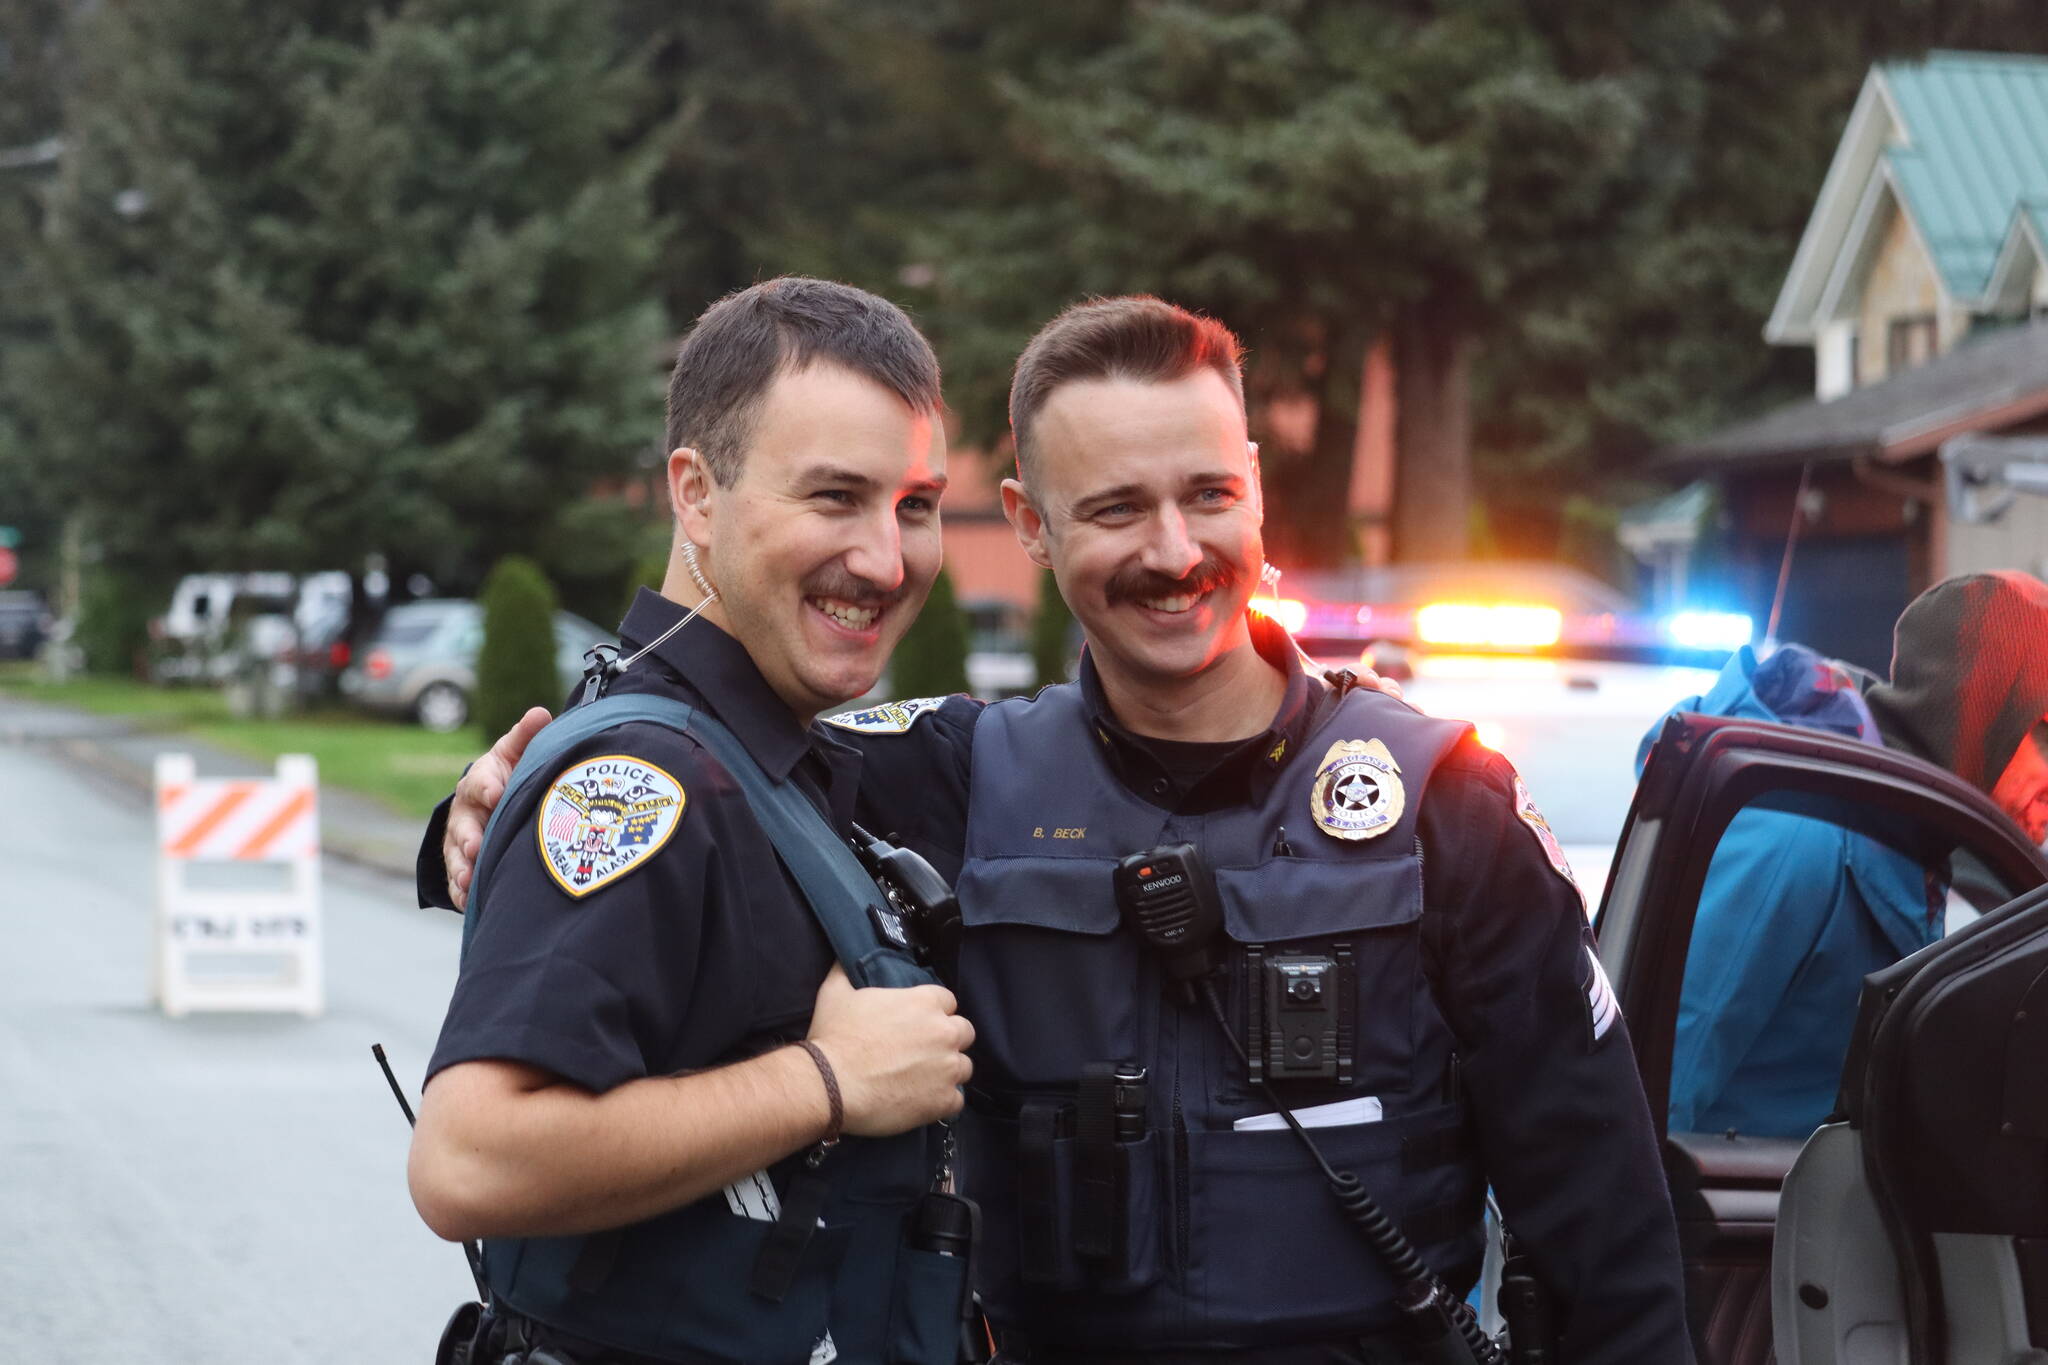 Juneau Police Officers Beckett Savage and Ben Beck pose together for a photo op taken on Rivercourt Street during National Night Out on Tuesday, Aug. 2.